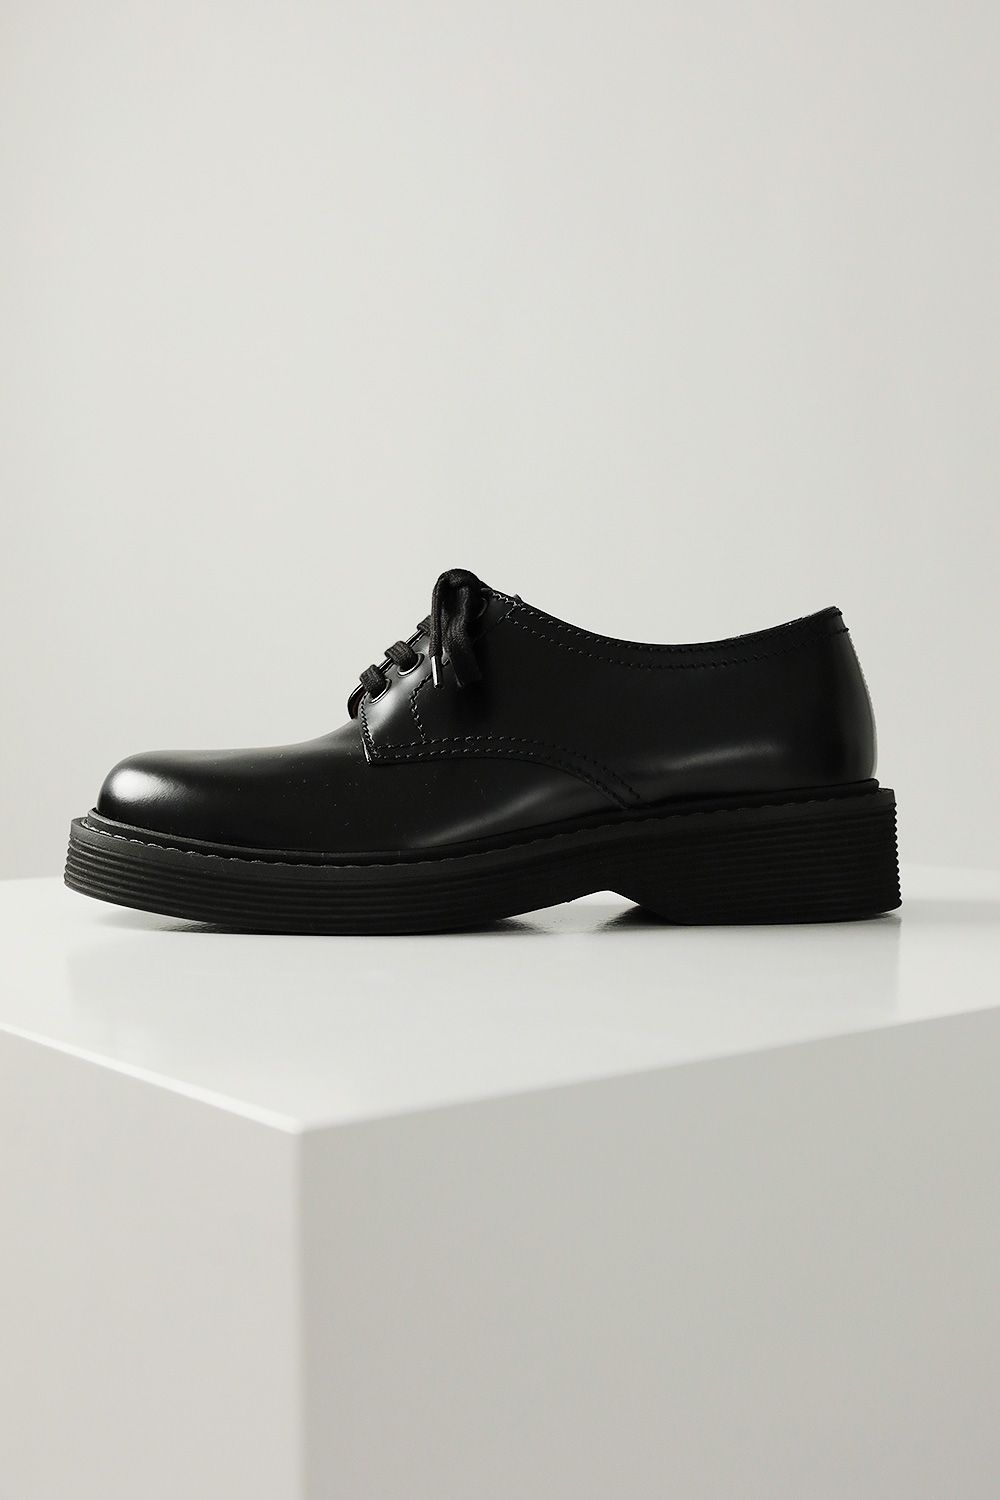 LEATHER DERBY SHOES(BLACK) - 41(26.0-27.0)